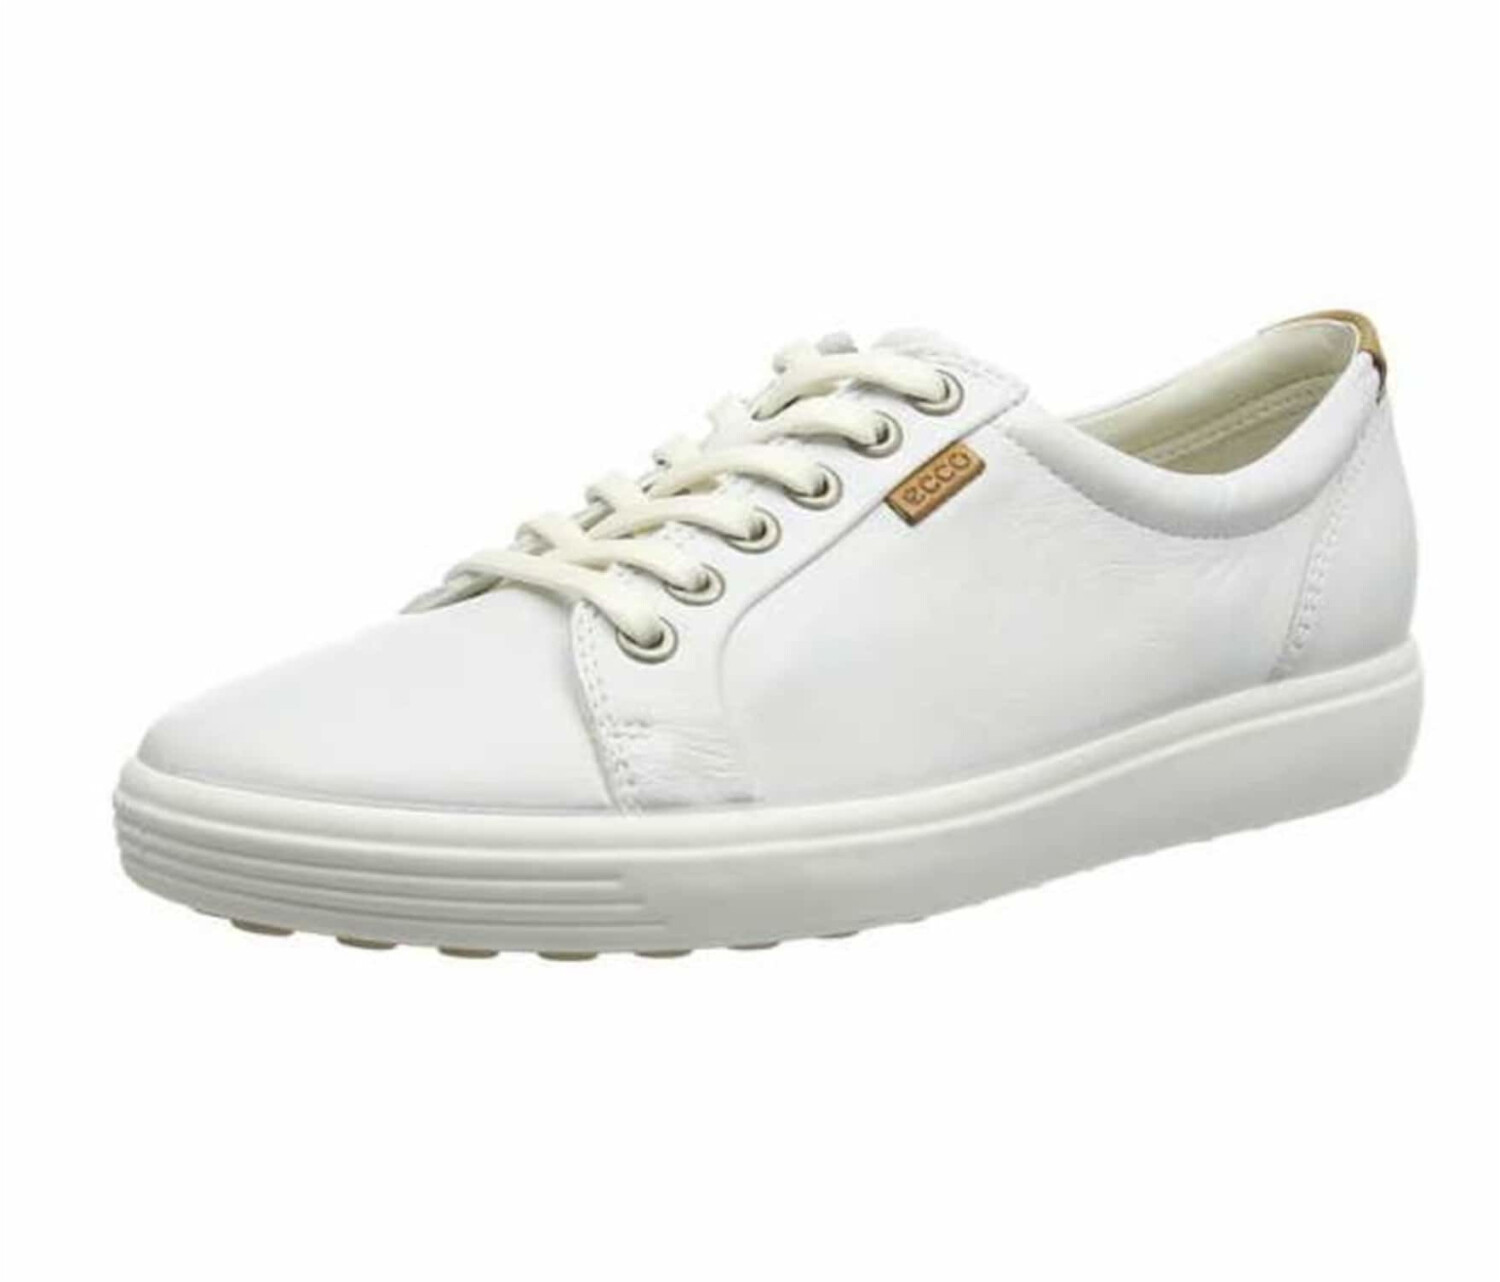 Buy Ecco Soft 7 Women white from £82.40 (Today) – Best Deals on idealo ...